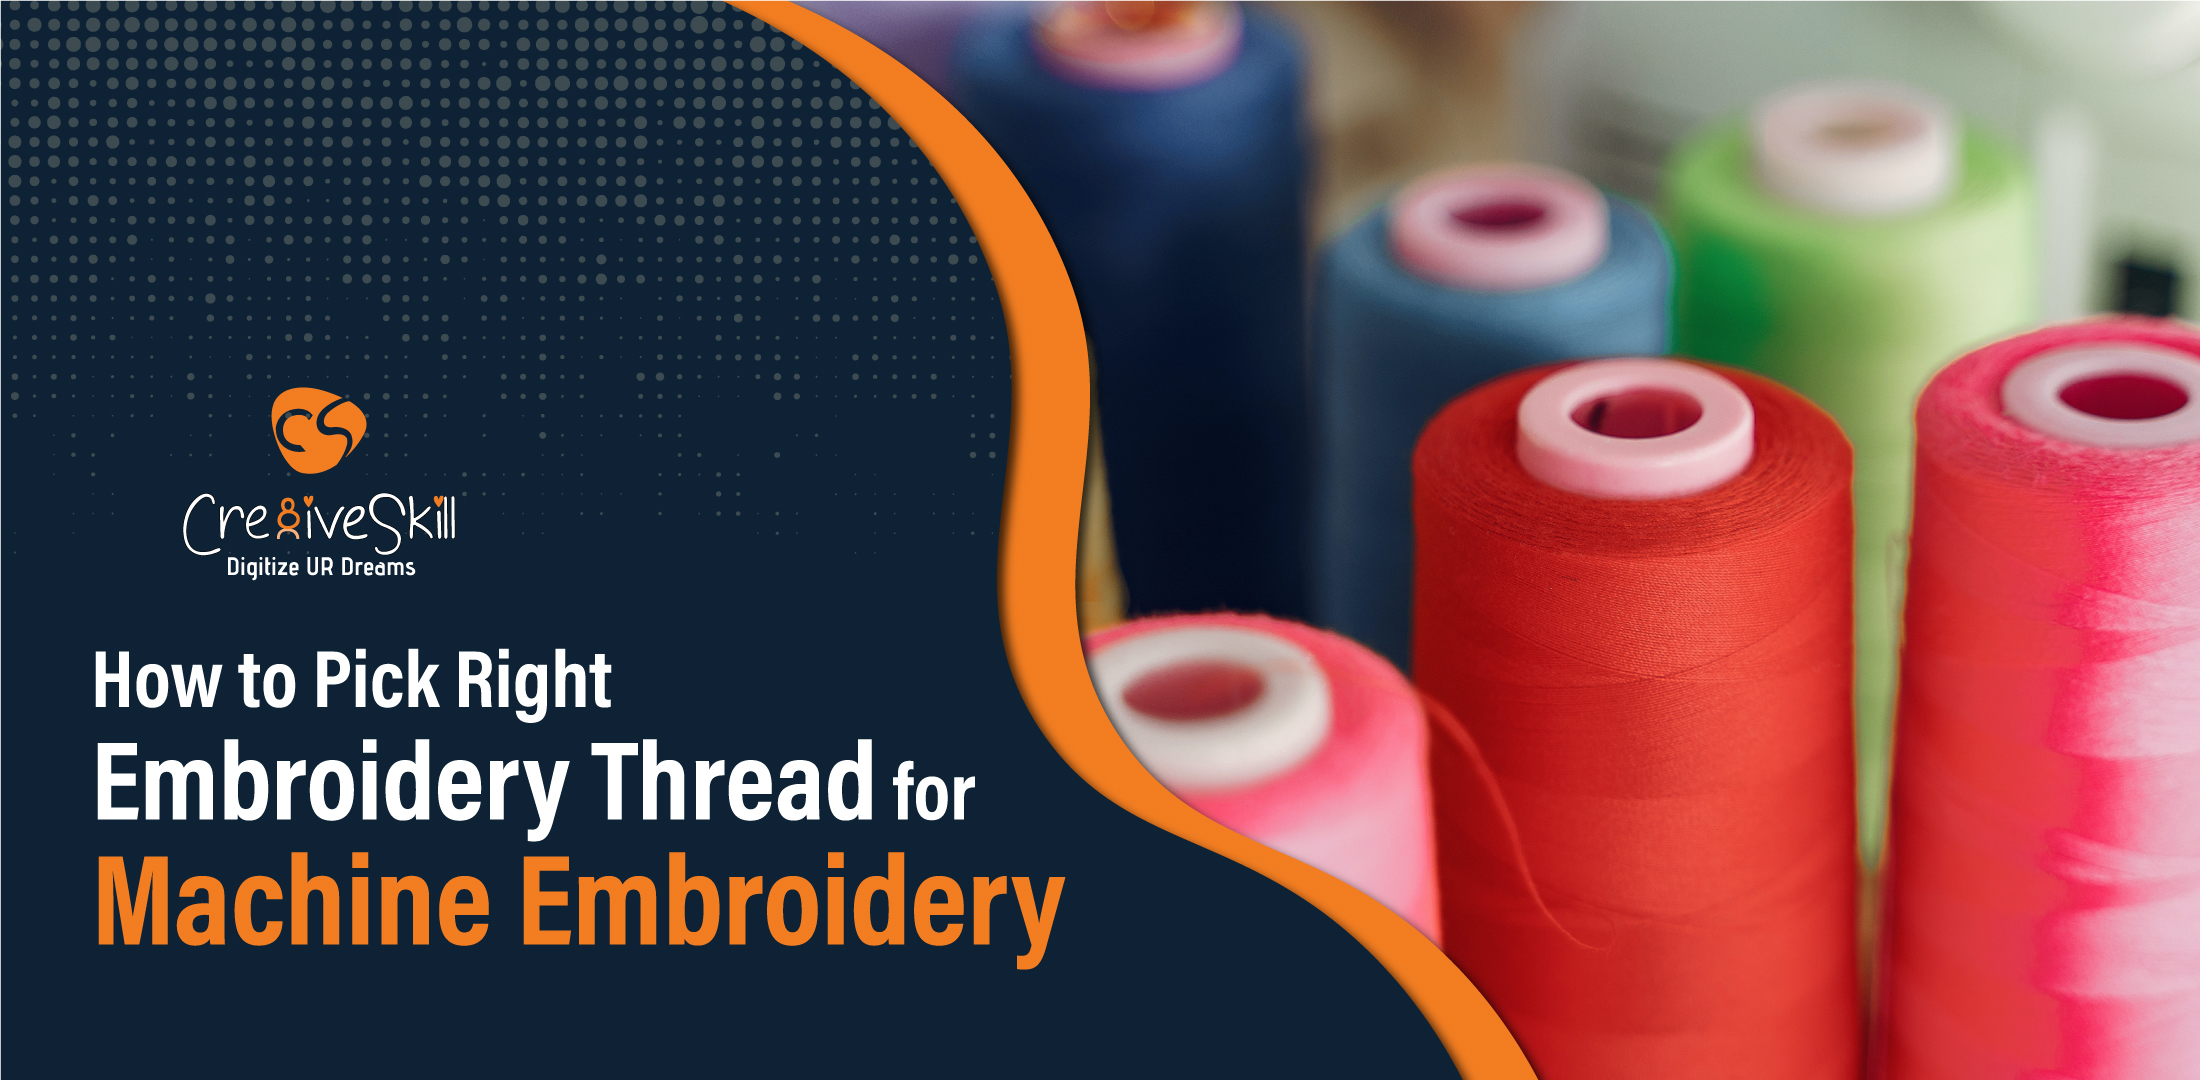 My Most Used Embroidery Supplies for my  Business - MUST HAVE 2021 LIST  for Embroidery Business 